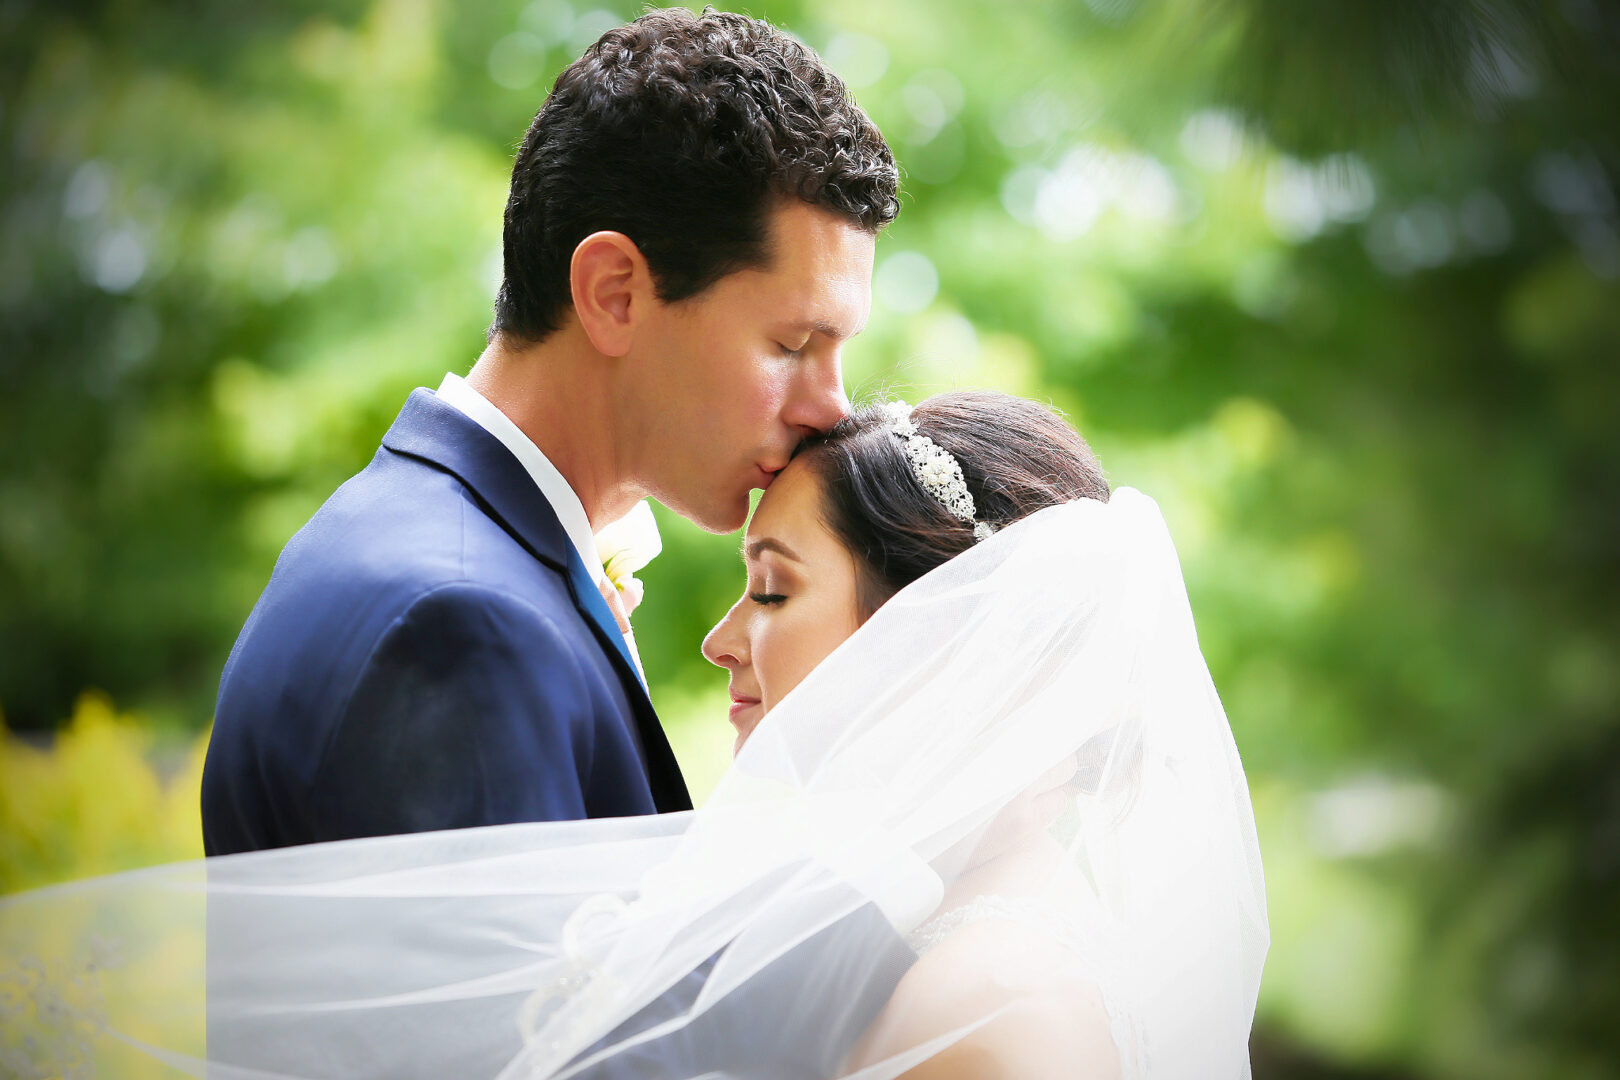 A kiss on the forehead by the groom with her veil flowing in the wind